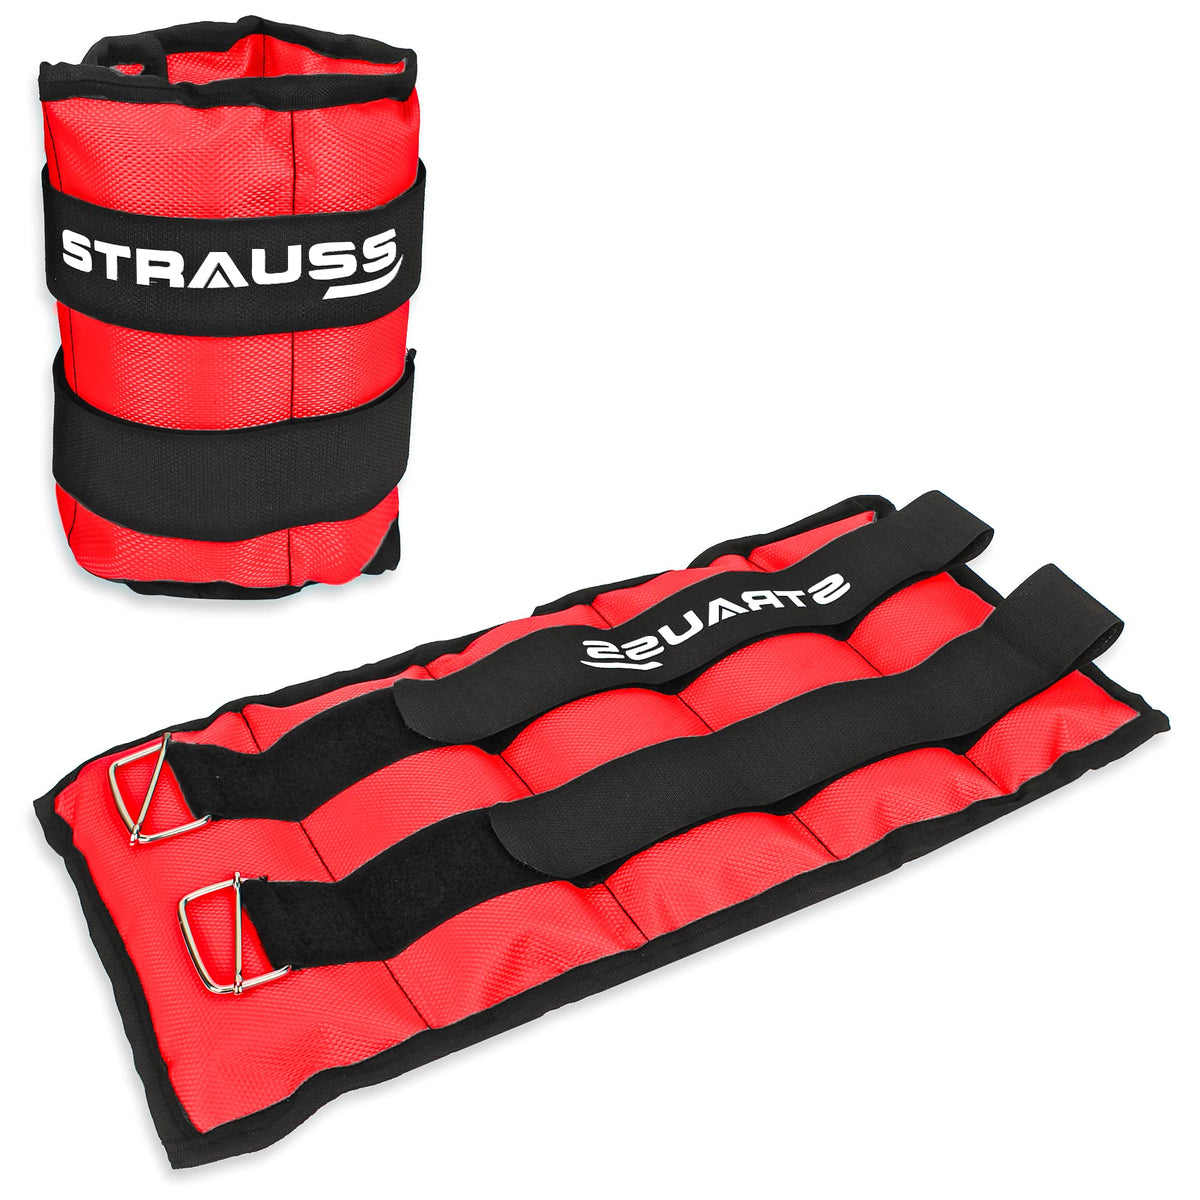 Strauss Ankle Weight, 2 Kg (Each), Pair, (Red)